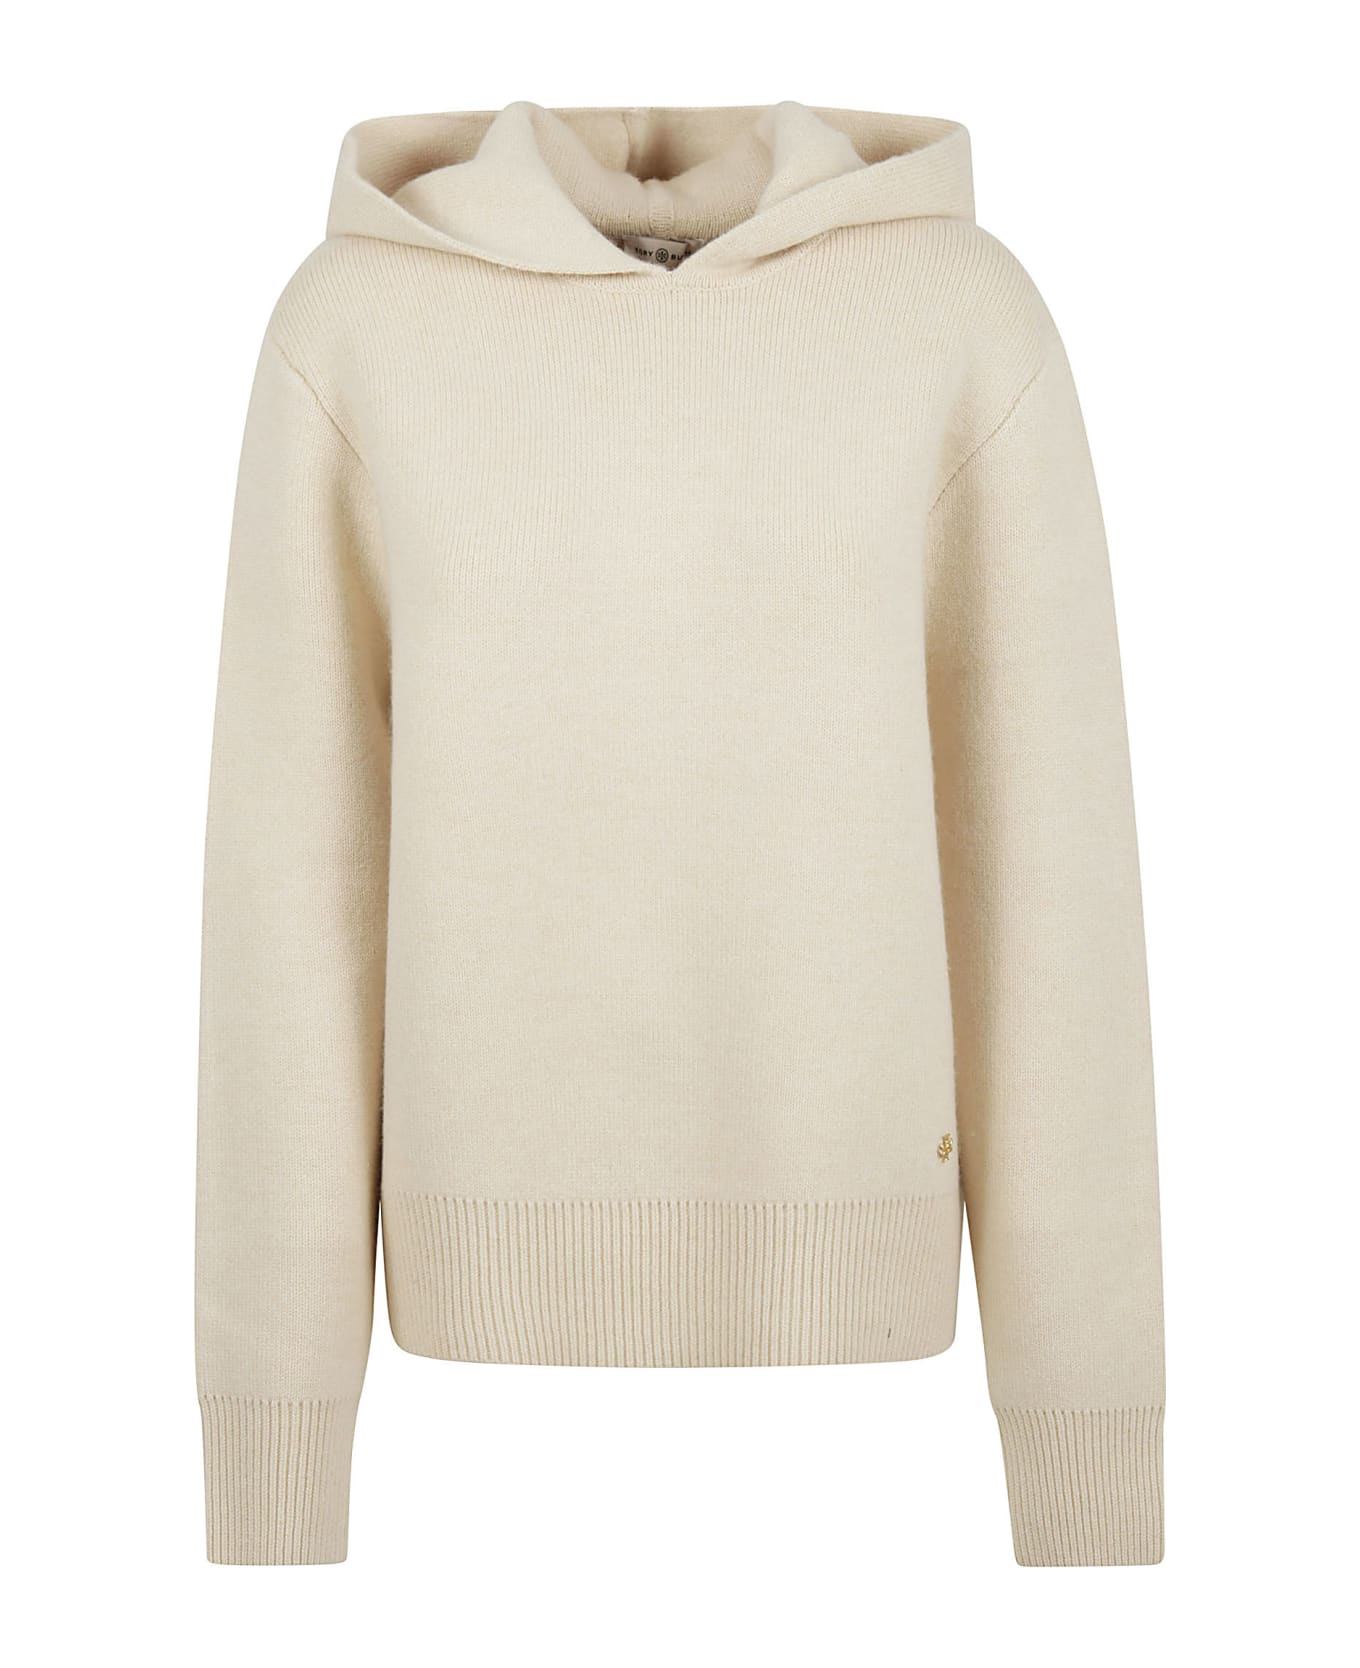 Tory Burch Cashmere Blend Hoodie - Plage